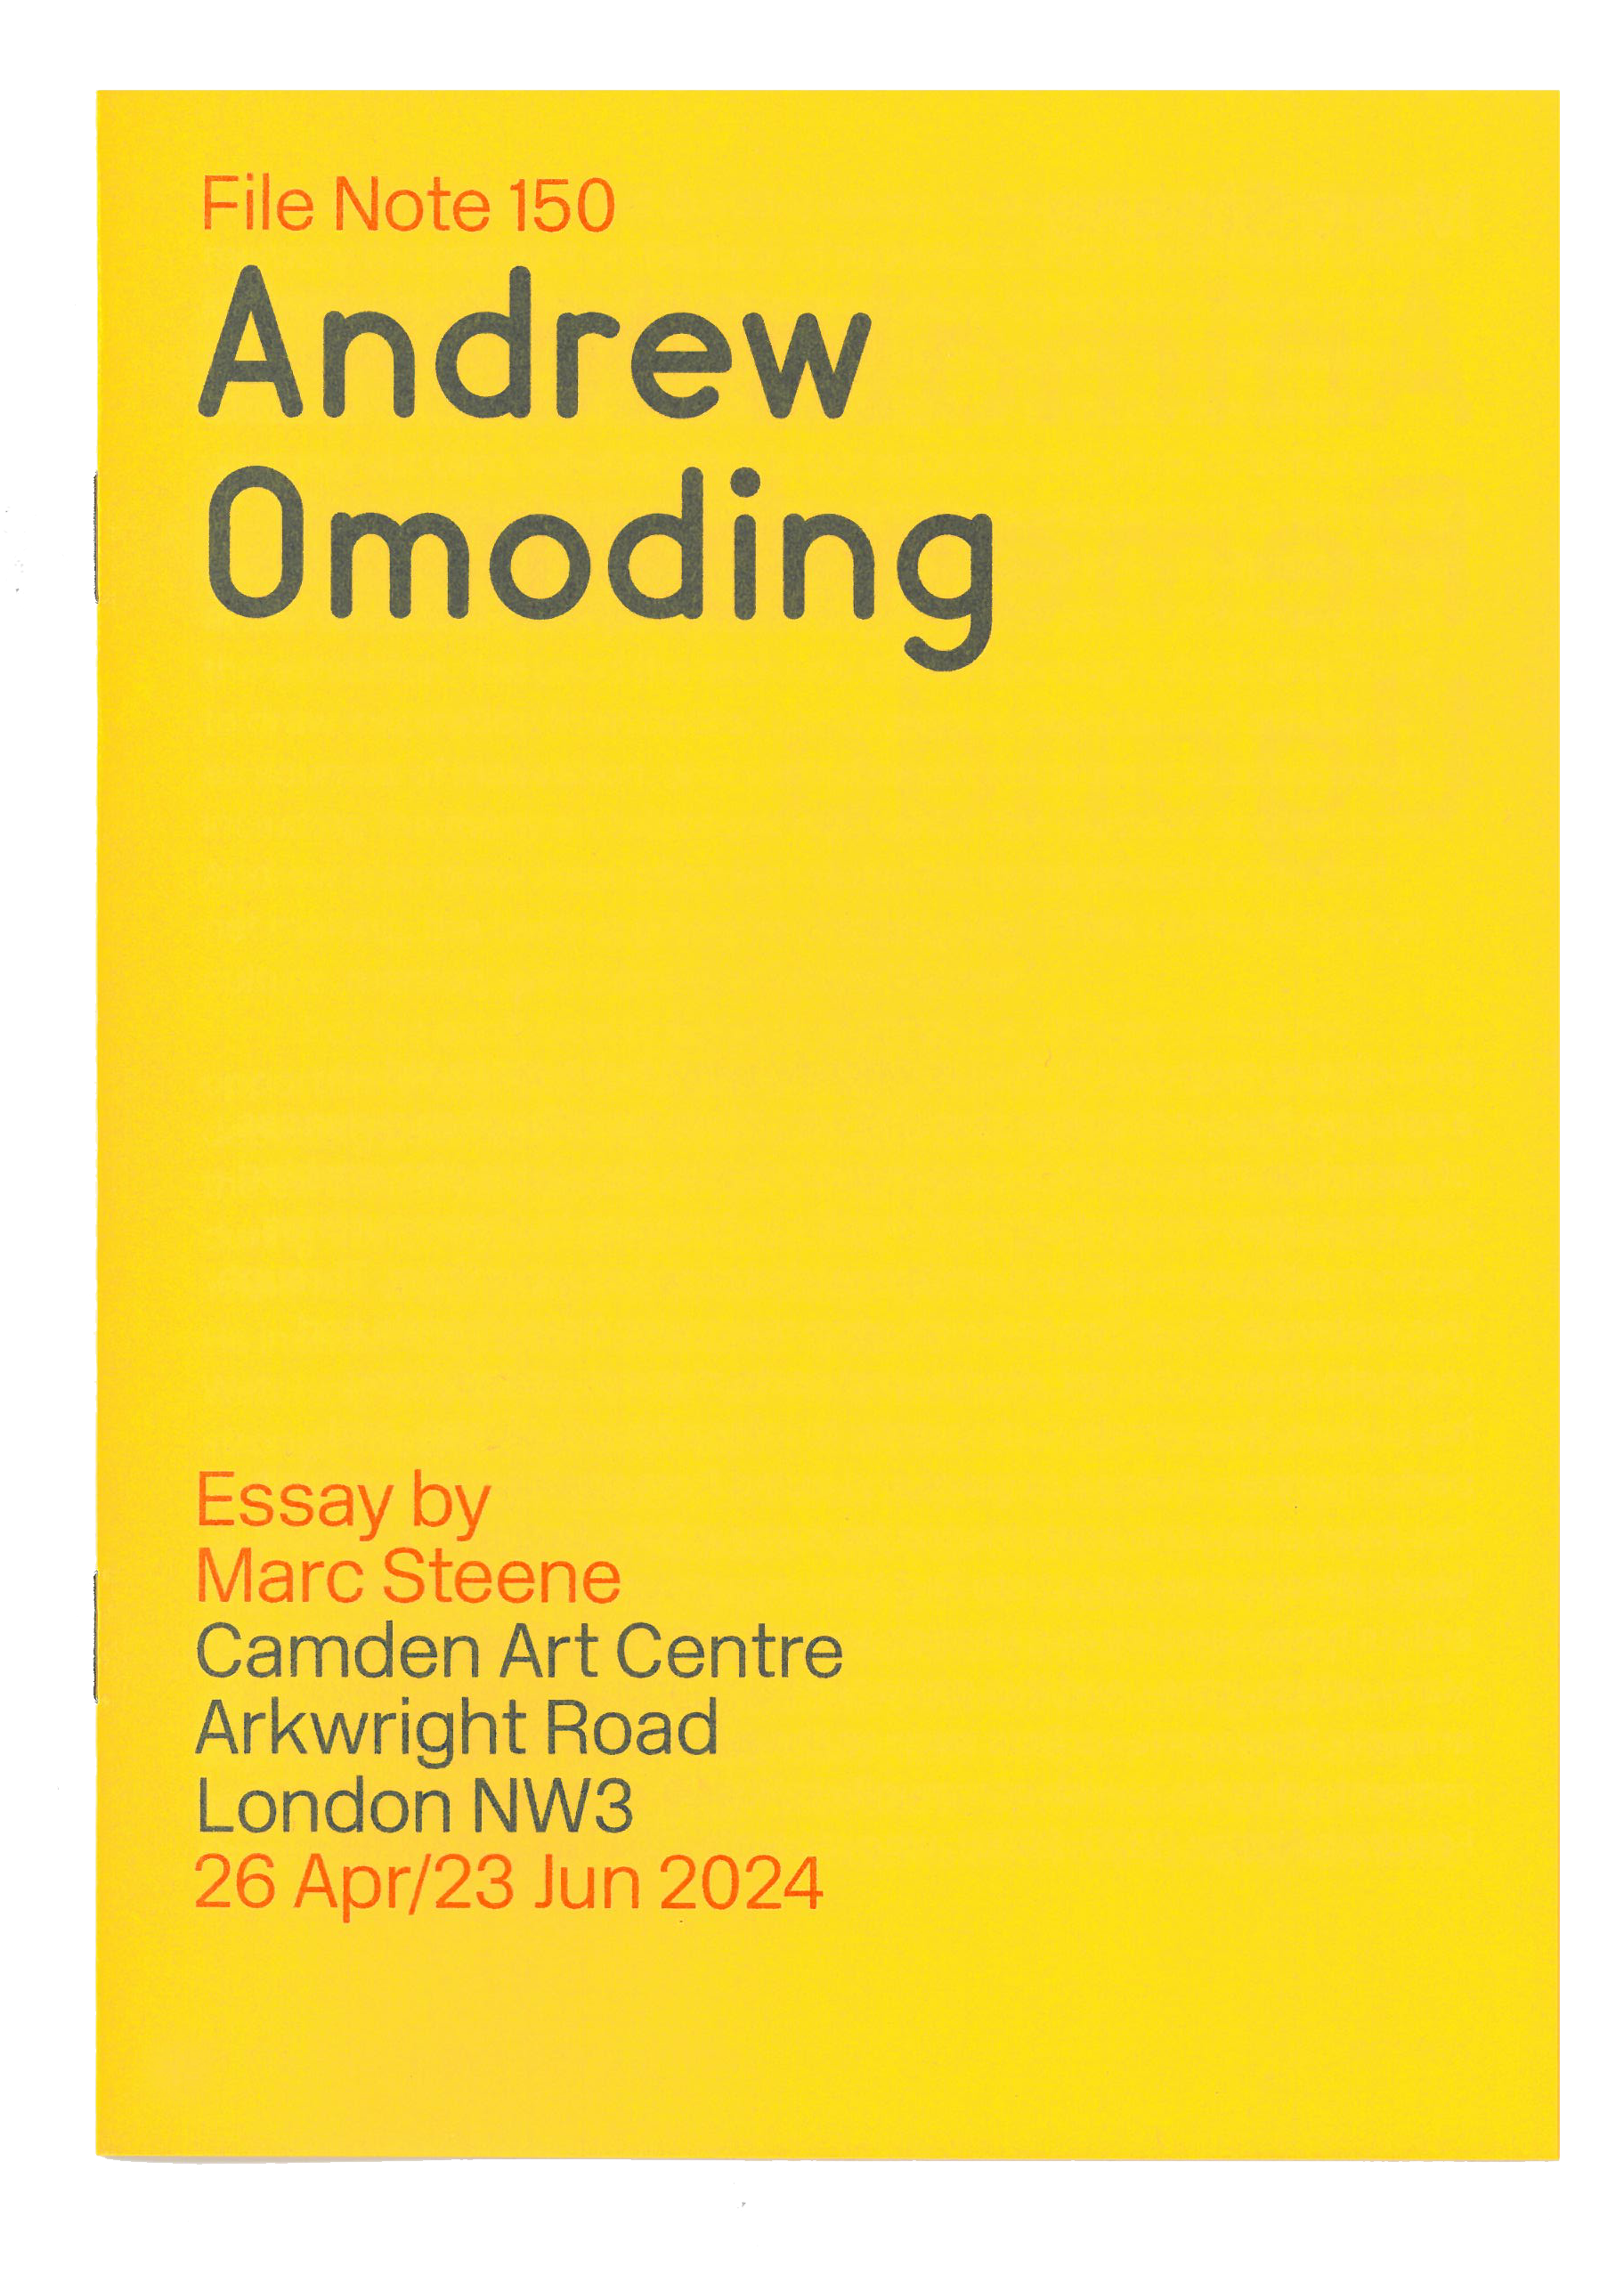 File Note 150, Andrew Omoding